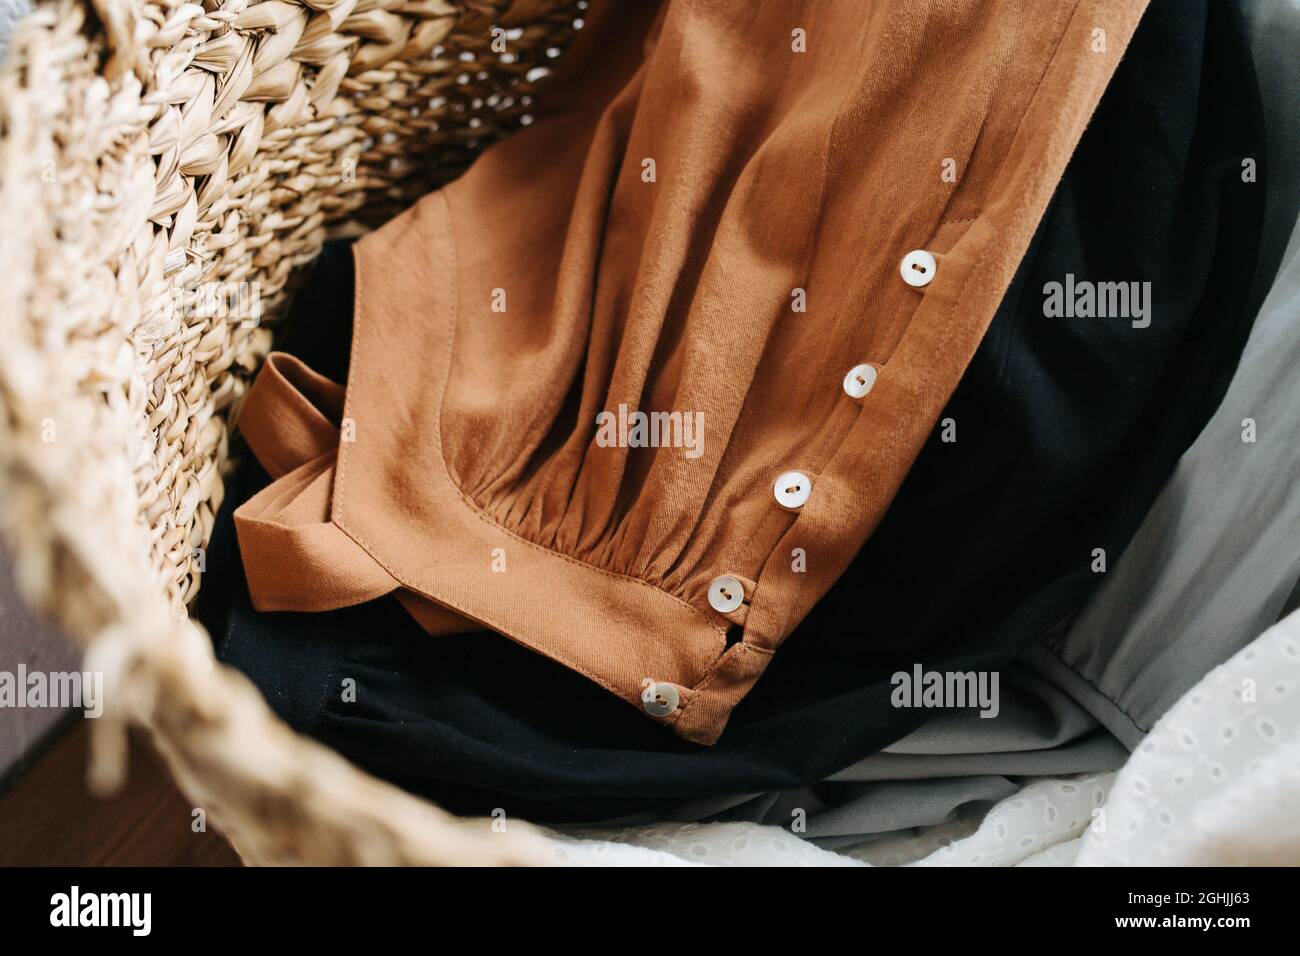 Close up image of a wicker basket full with summer dresses for washing laungry. Top view. Stock Photo